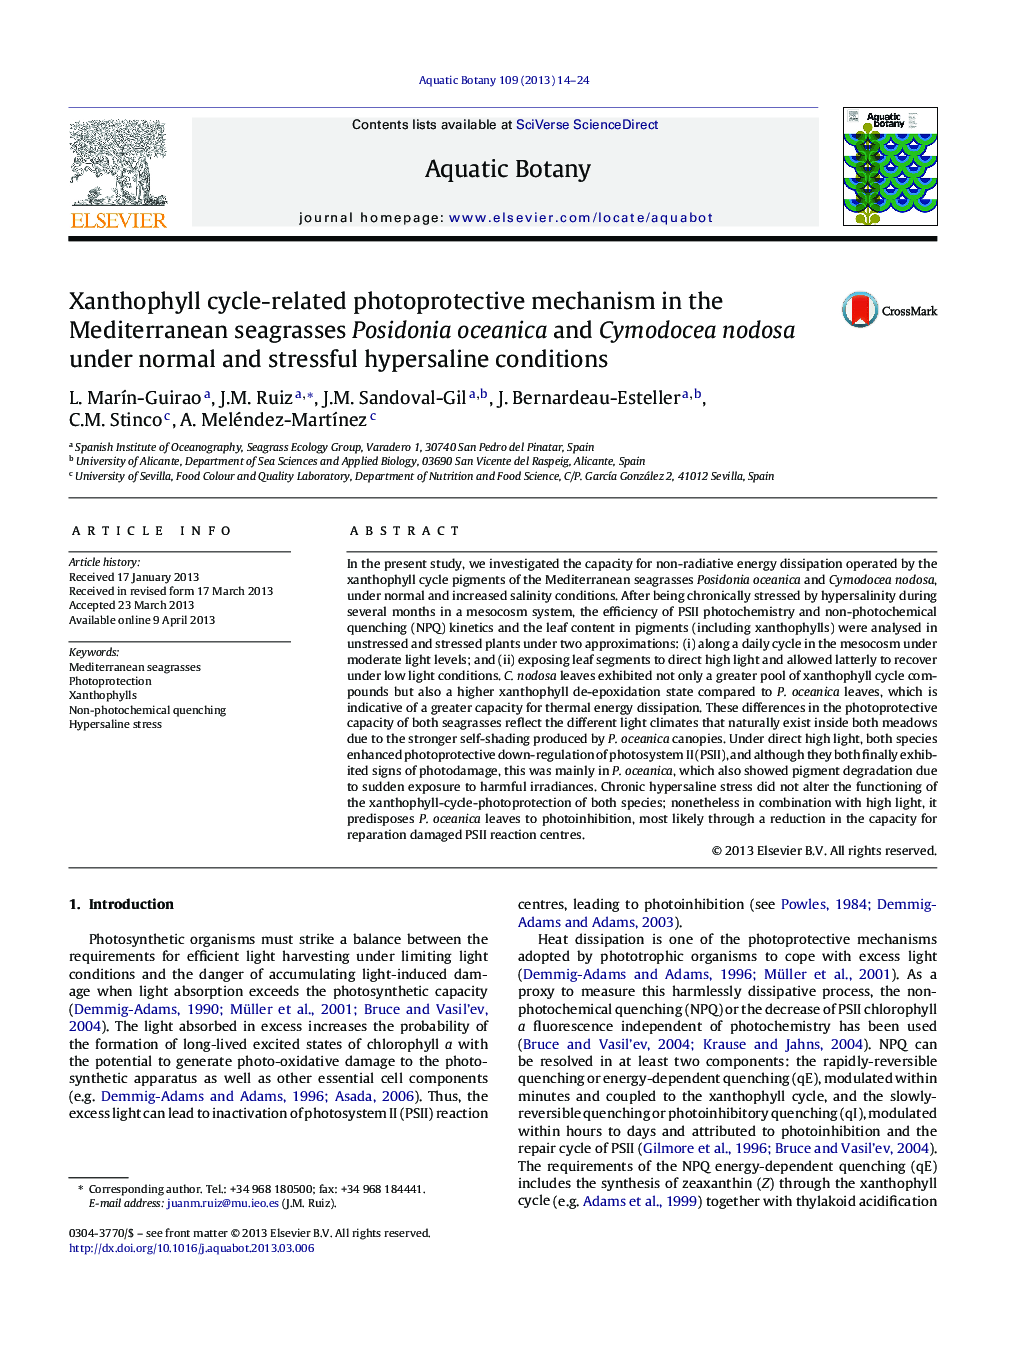 Xanthophyll cycle-related photoprotective mechanism in the Mediterranean seagrasses Posidonia oceanica and Cymodocea nodosa under normal and stressful hypersaline conditions